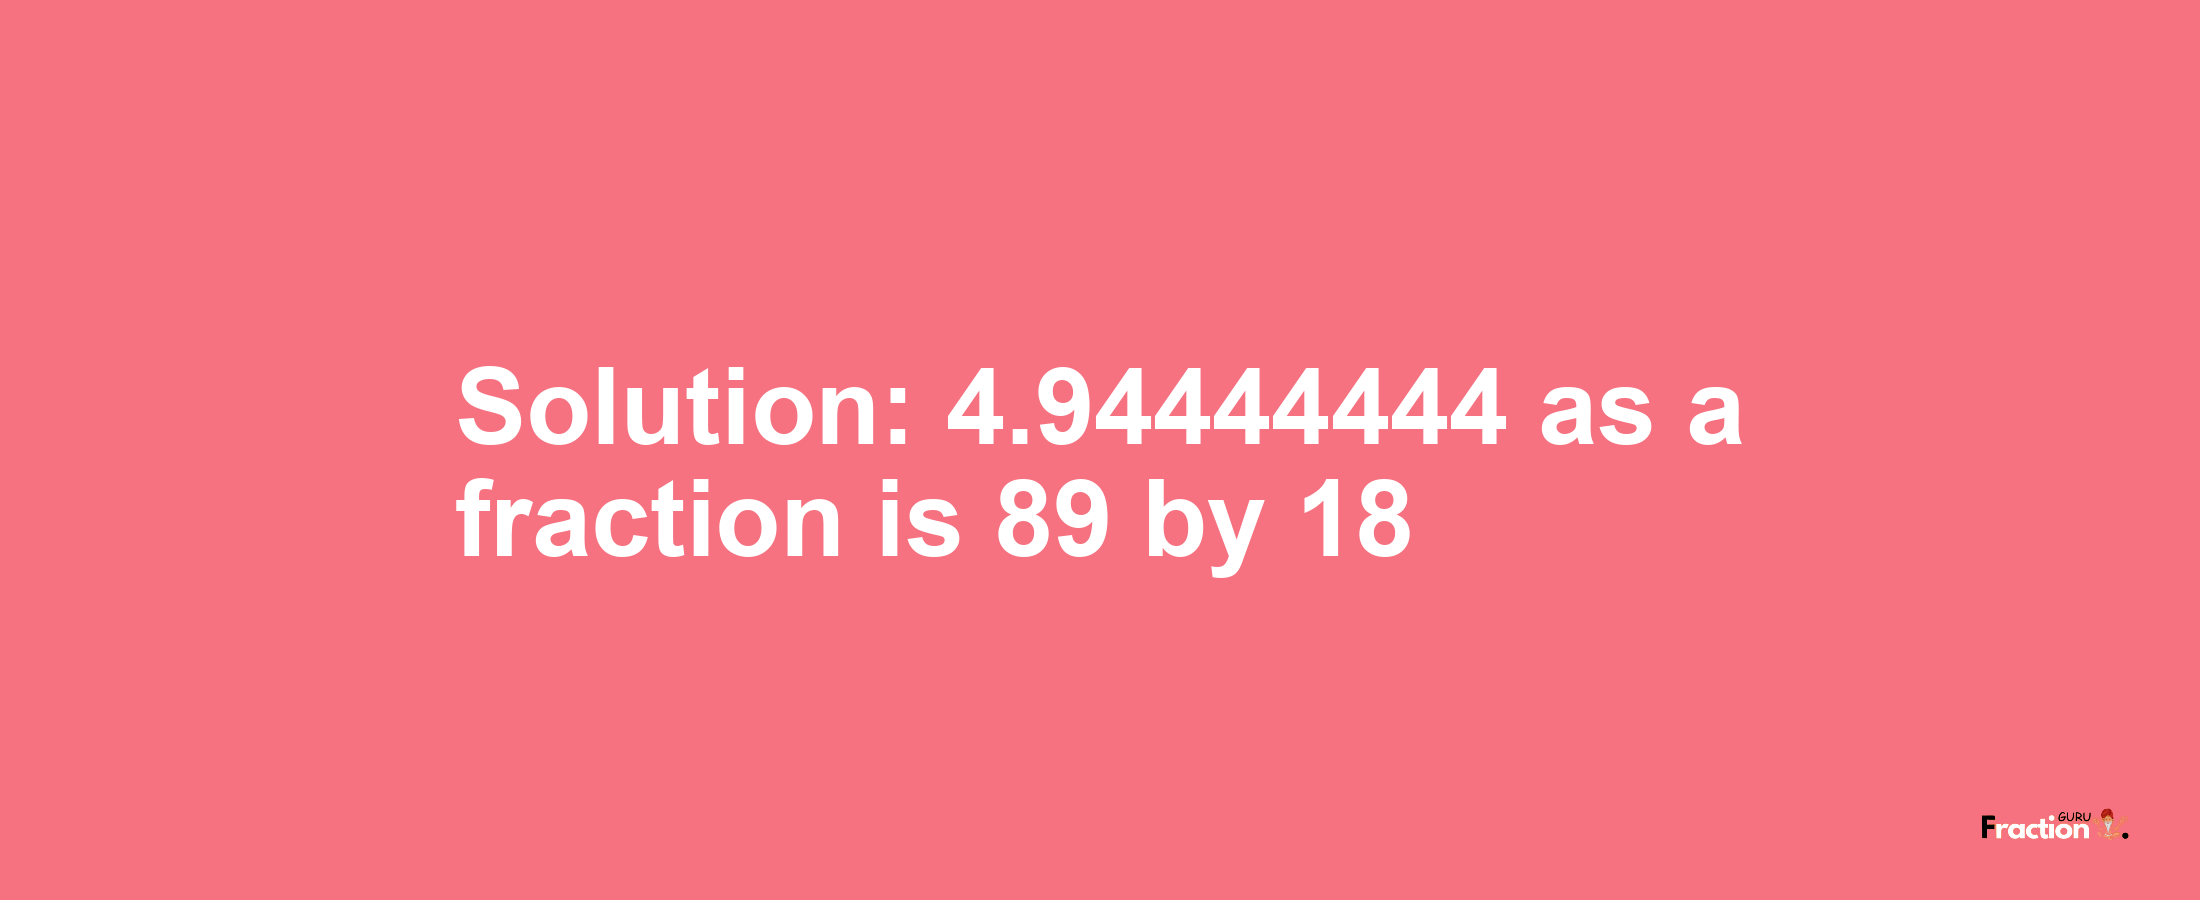 Solution:4.94444444 as a fraction is 89/18